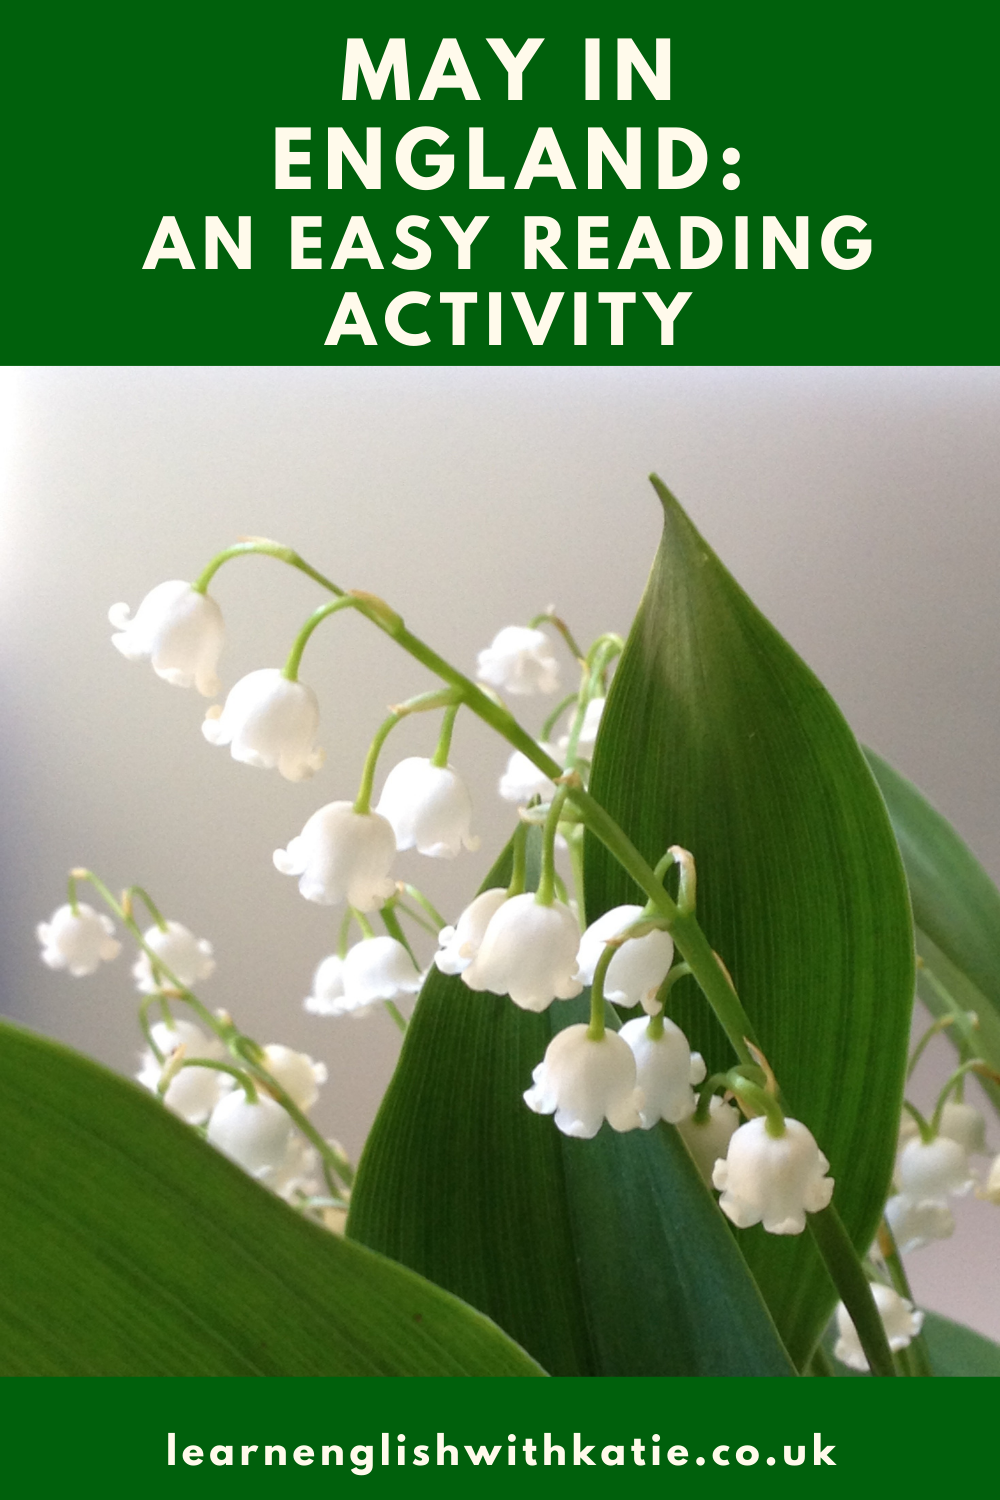 Image of lily of the valley. Text reads May in England and easy reading activity.